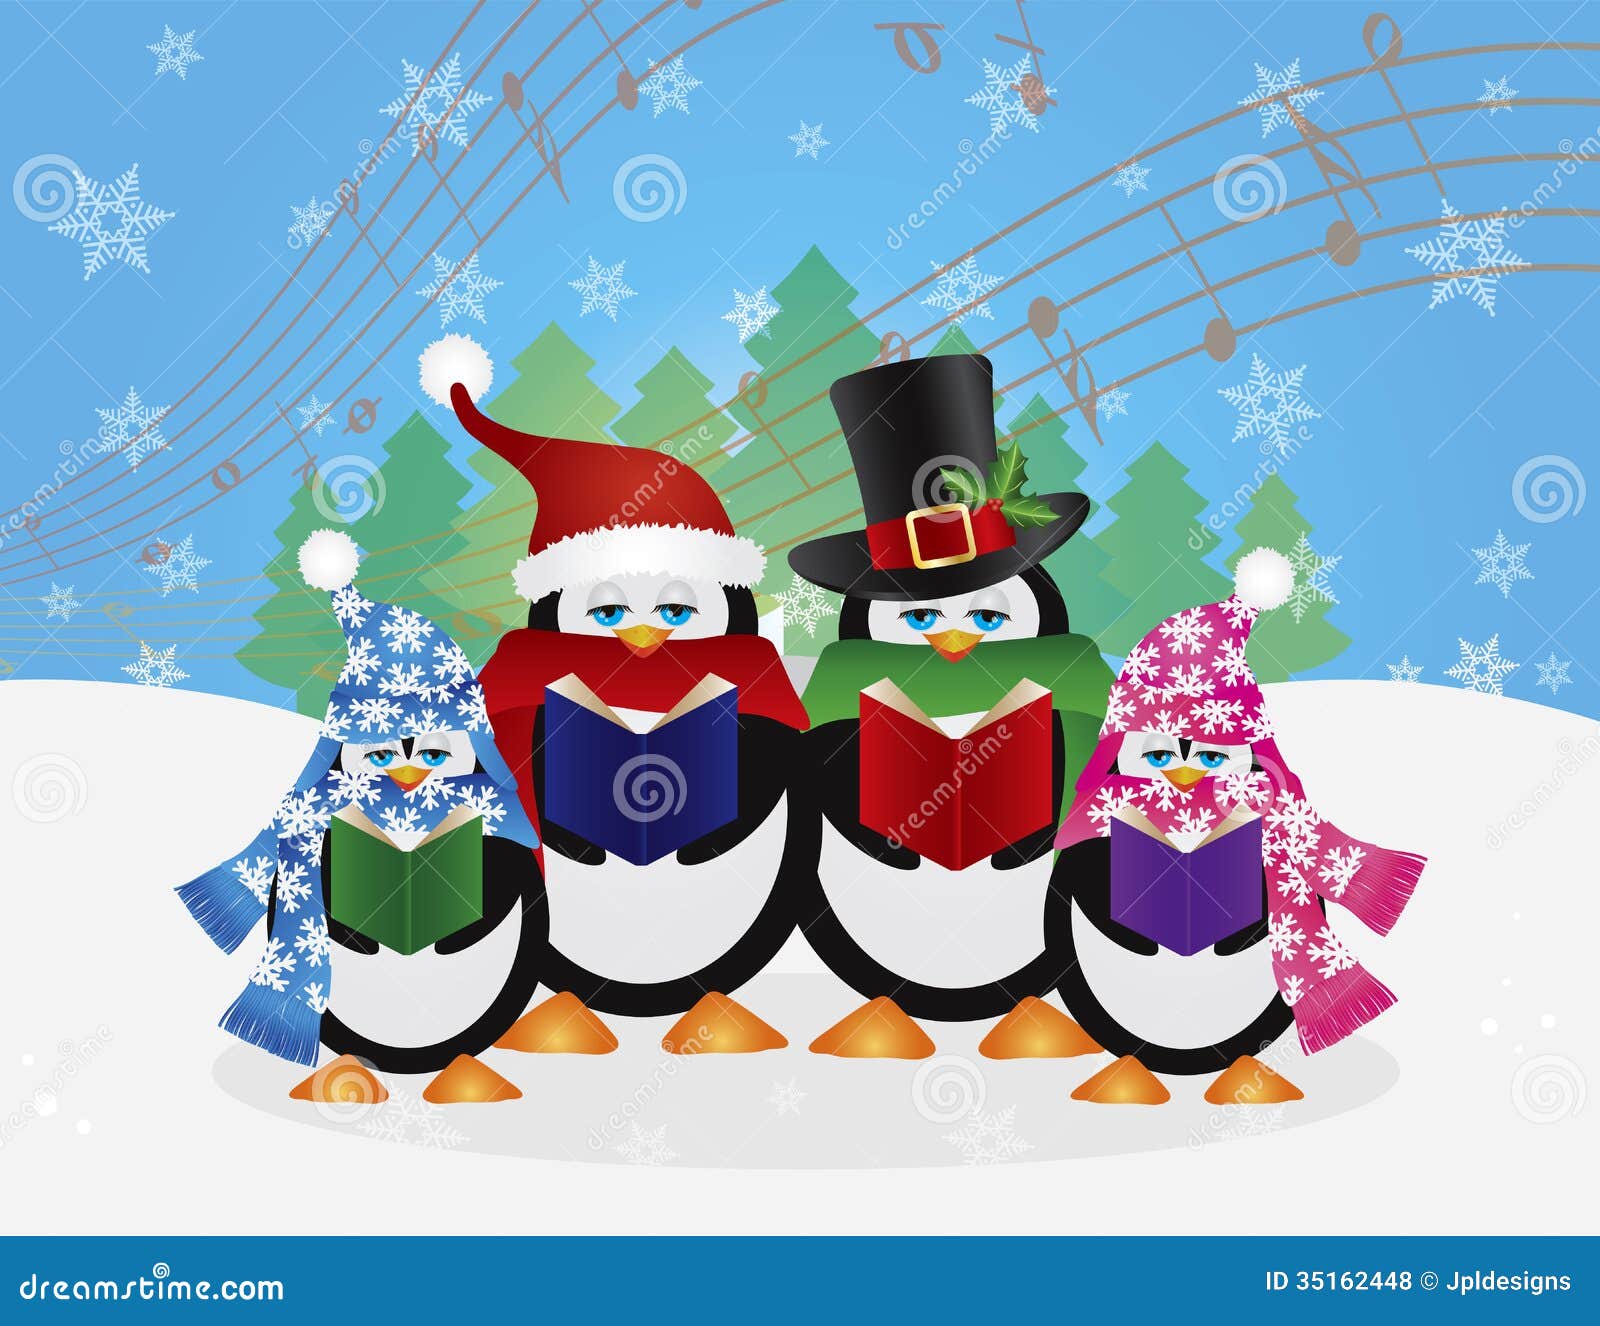 christmas music clipart free download - photo #45